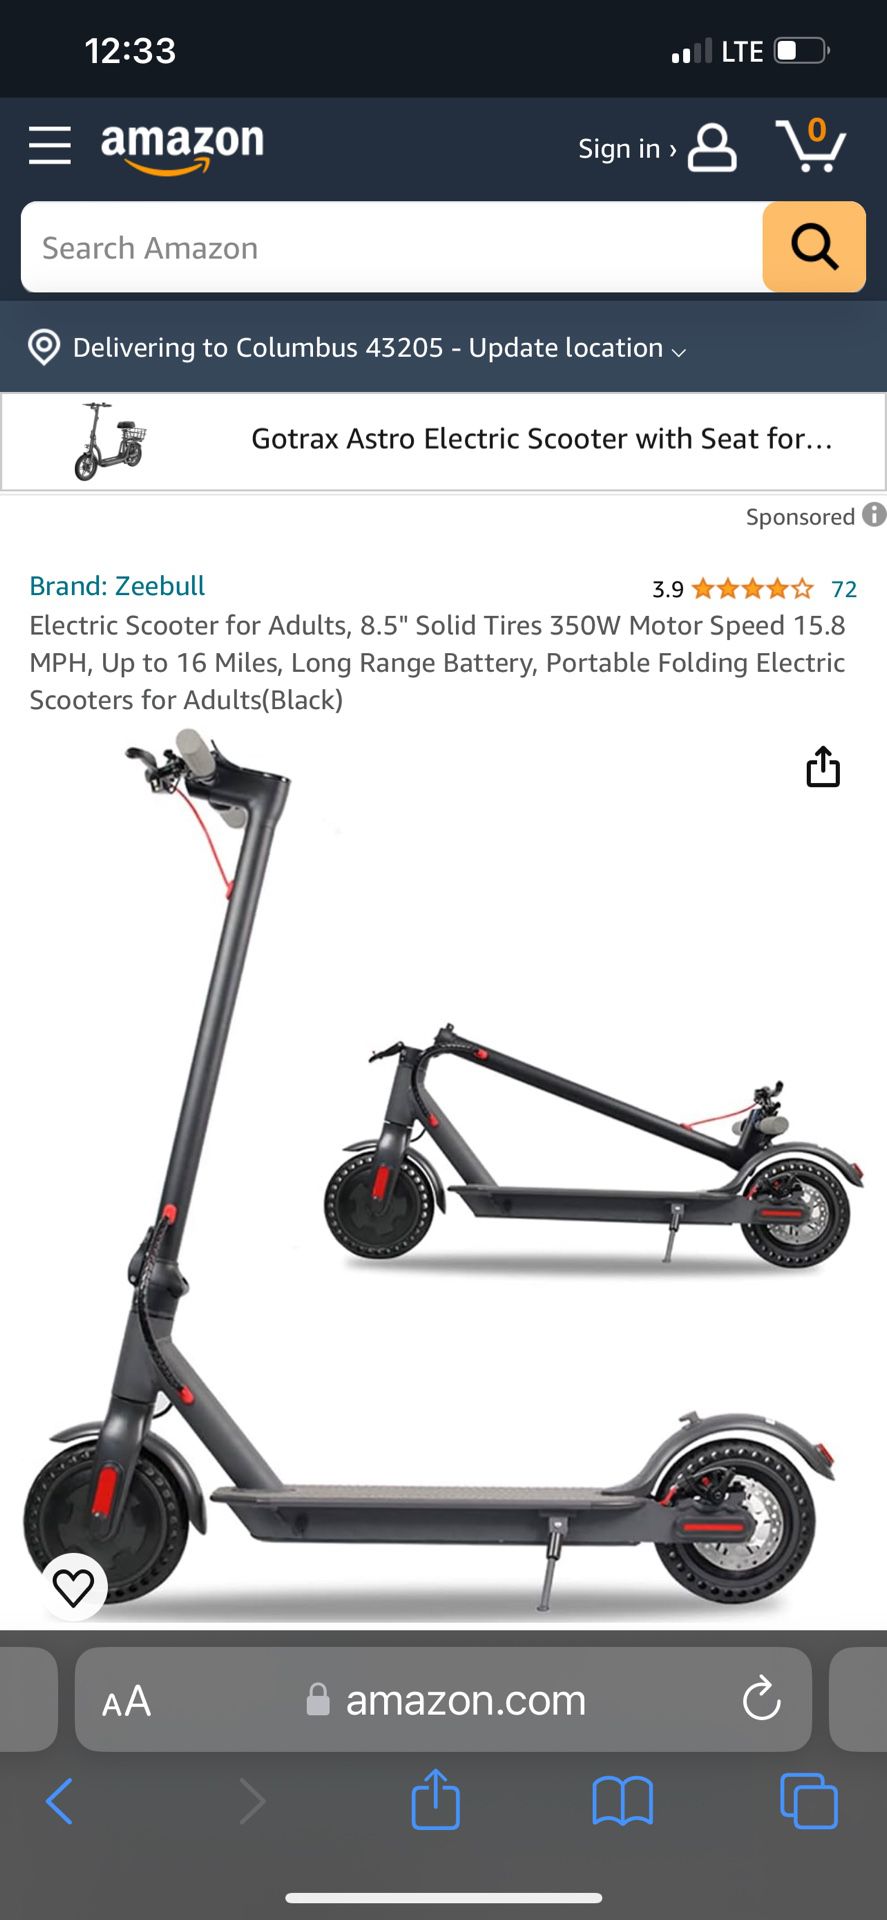 Electric Folding Scooter KS8512Y#